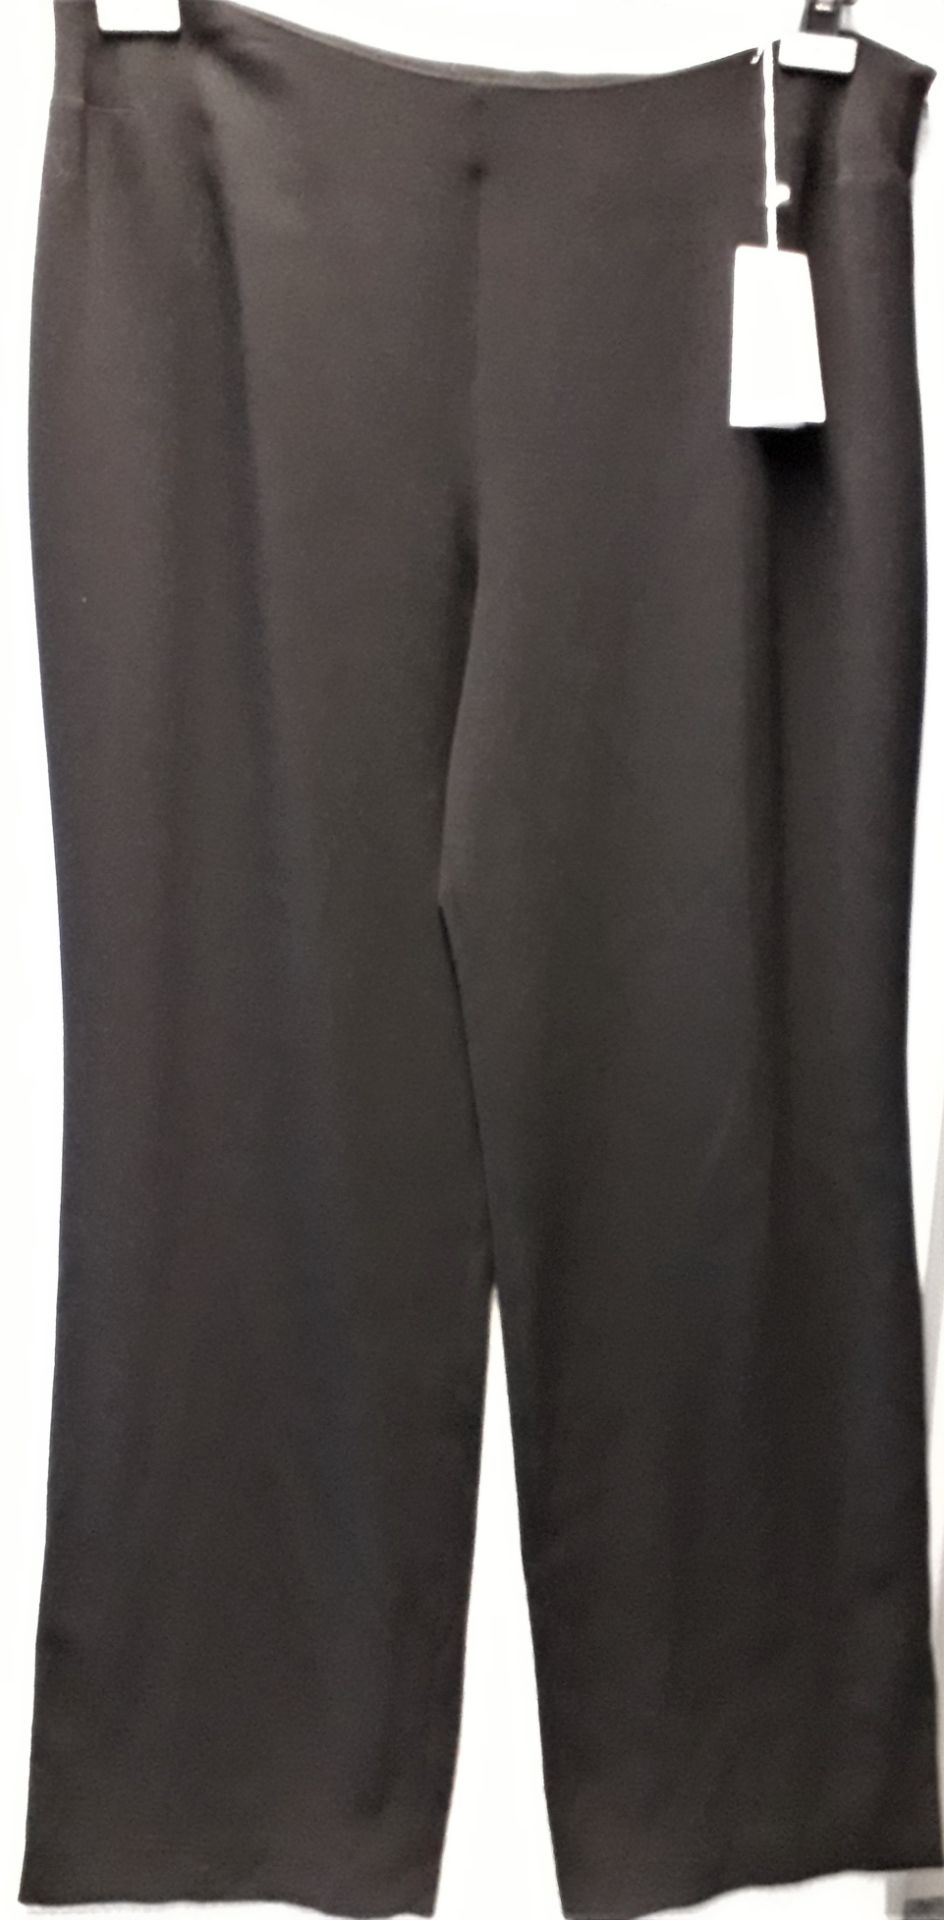 1 x Natan Plus Black Trousers - Size: 48 - Material: 99% Virgin Wool, 1% Nylon - From a High End